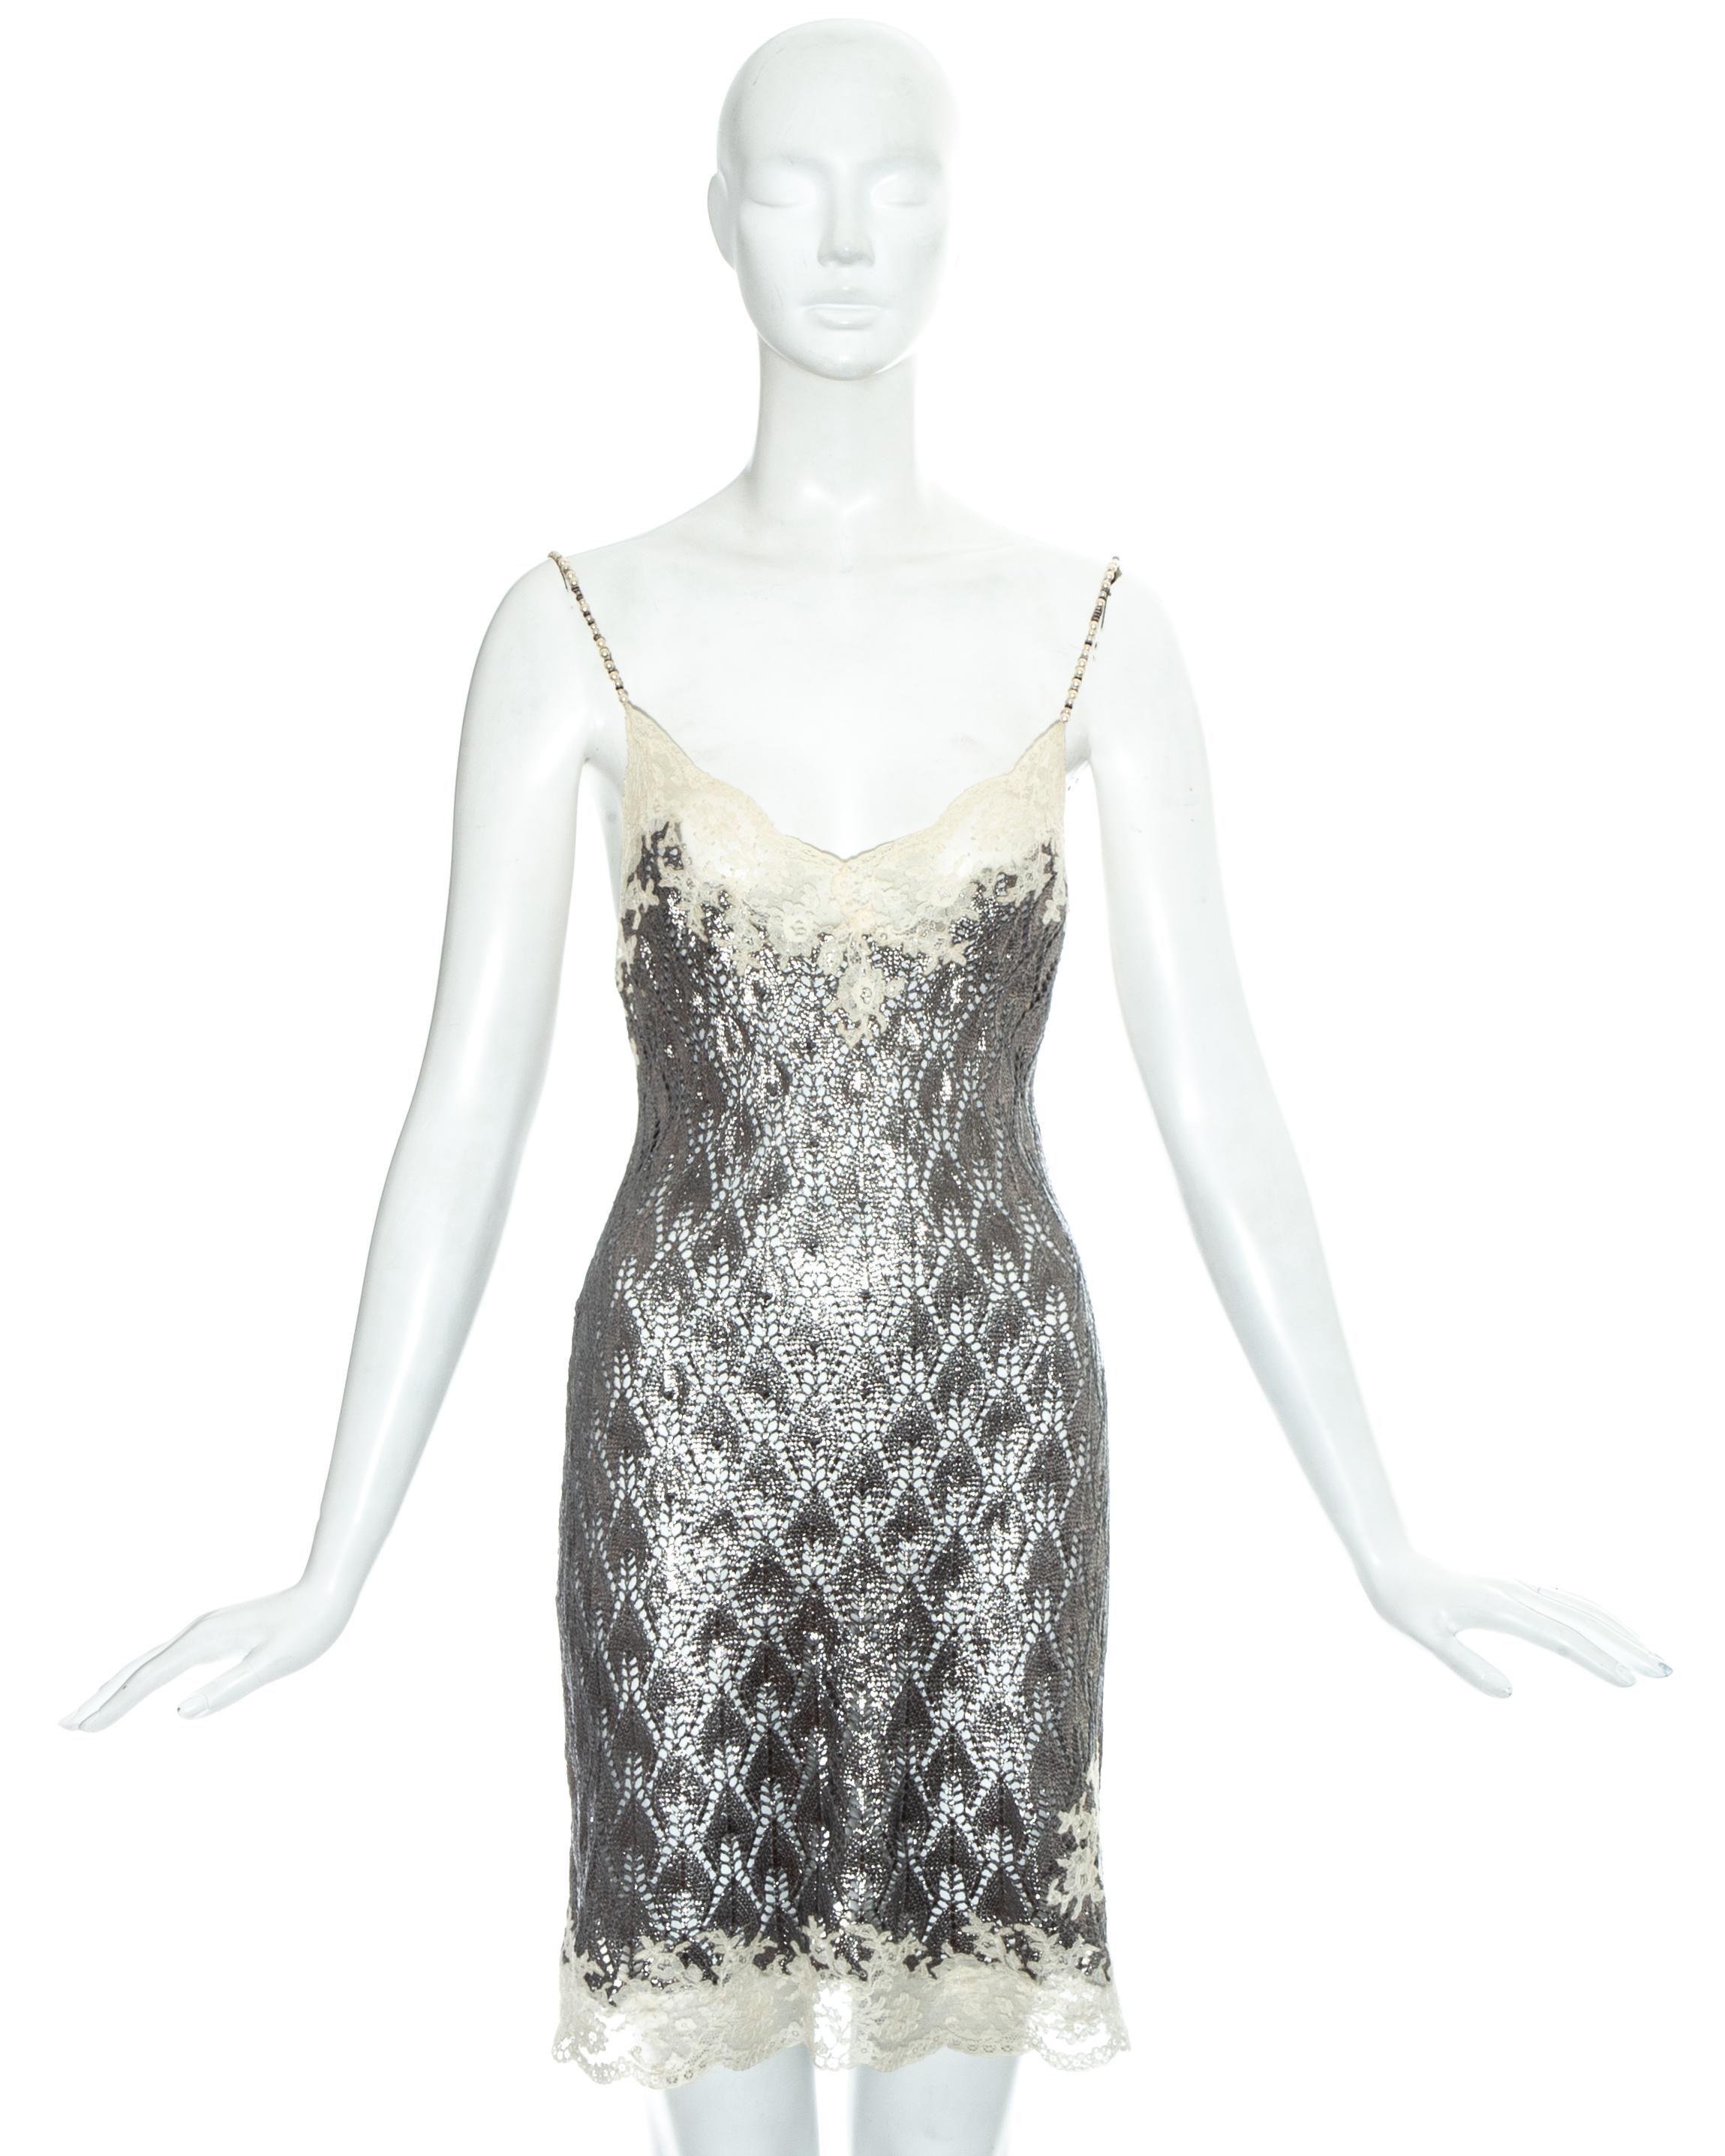 Christian Dior by John Galliano metallic silver crochet knit evening mini dress with cream lace trim and beaded spaghetti straps

Spring-Summer 1998